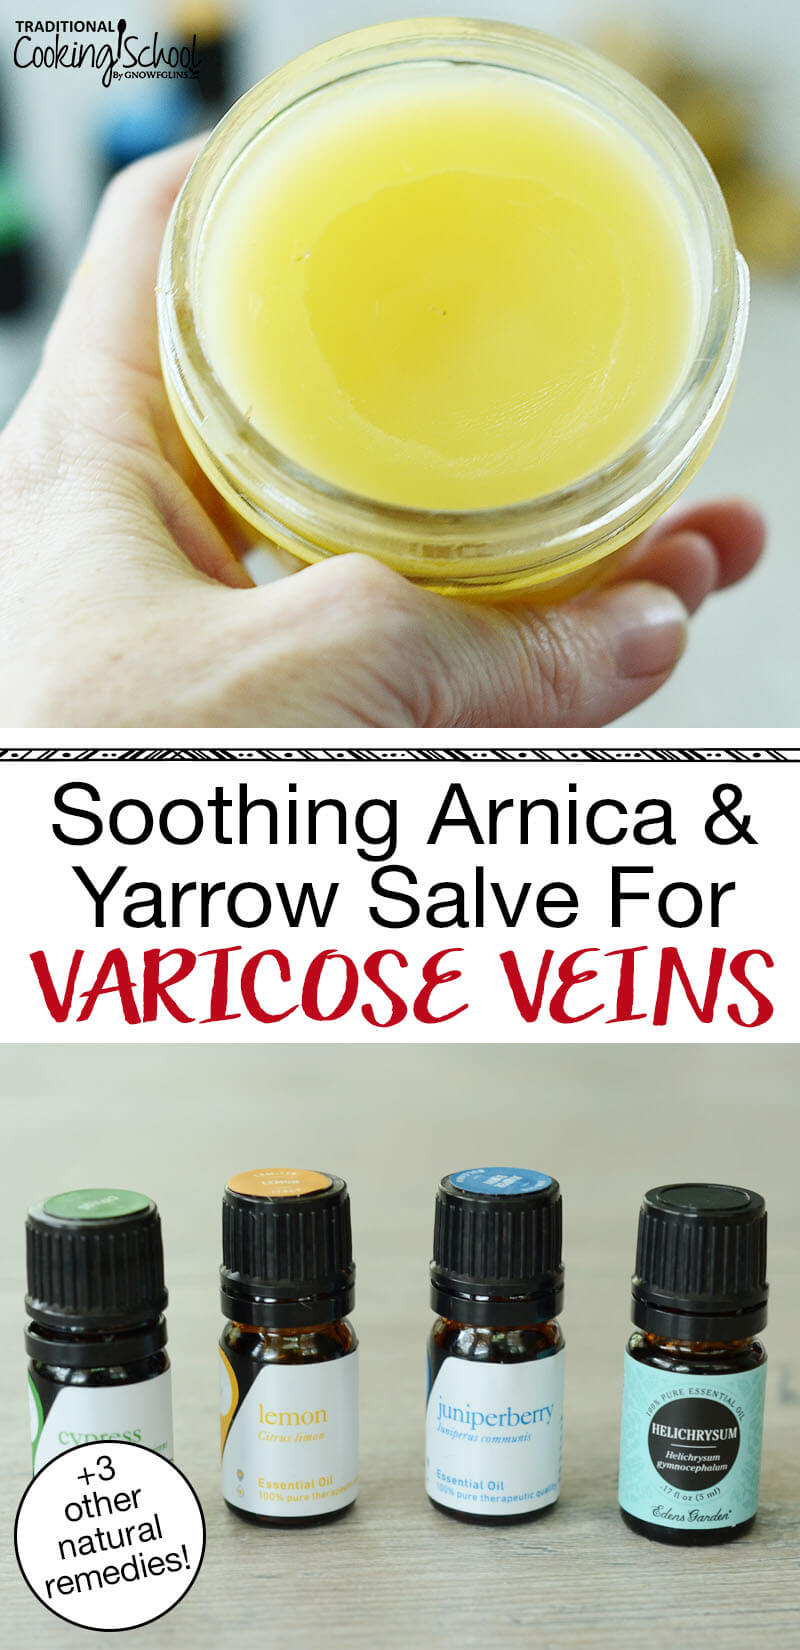 photo collage of a yellow-colored salve in a half pint Mason jar and four essential oils including juniper berry and helichrysum, with text overlay: "Soothing Arnica & Yarrow Salve For Varicose Veins (+3 other natural remedies!)"